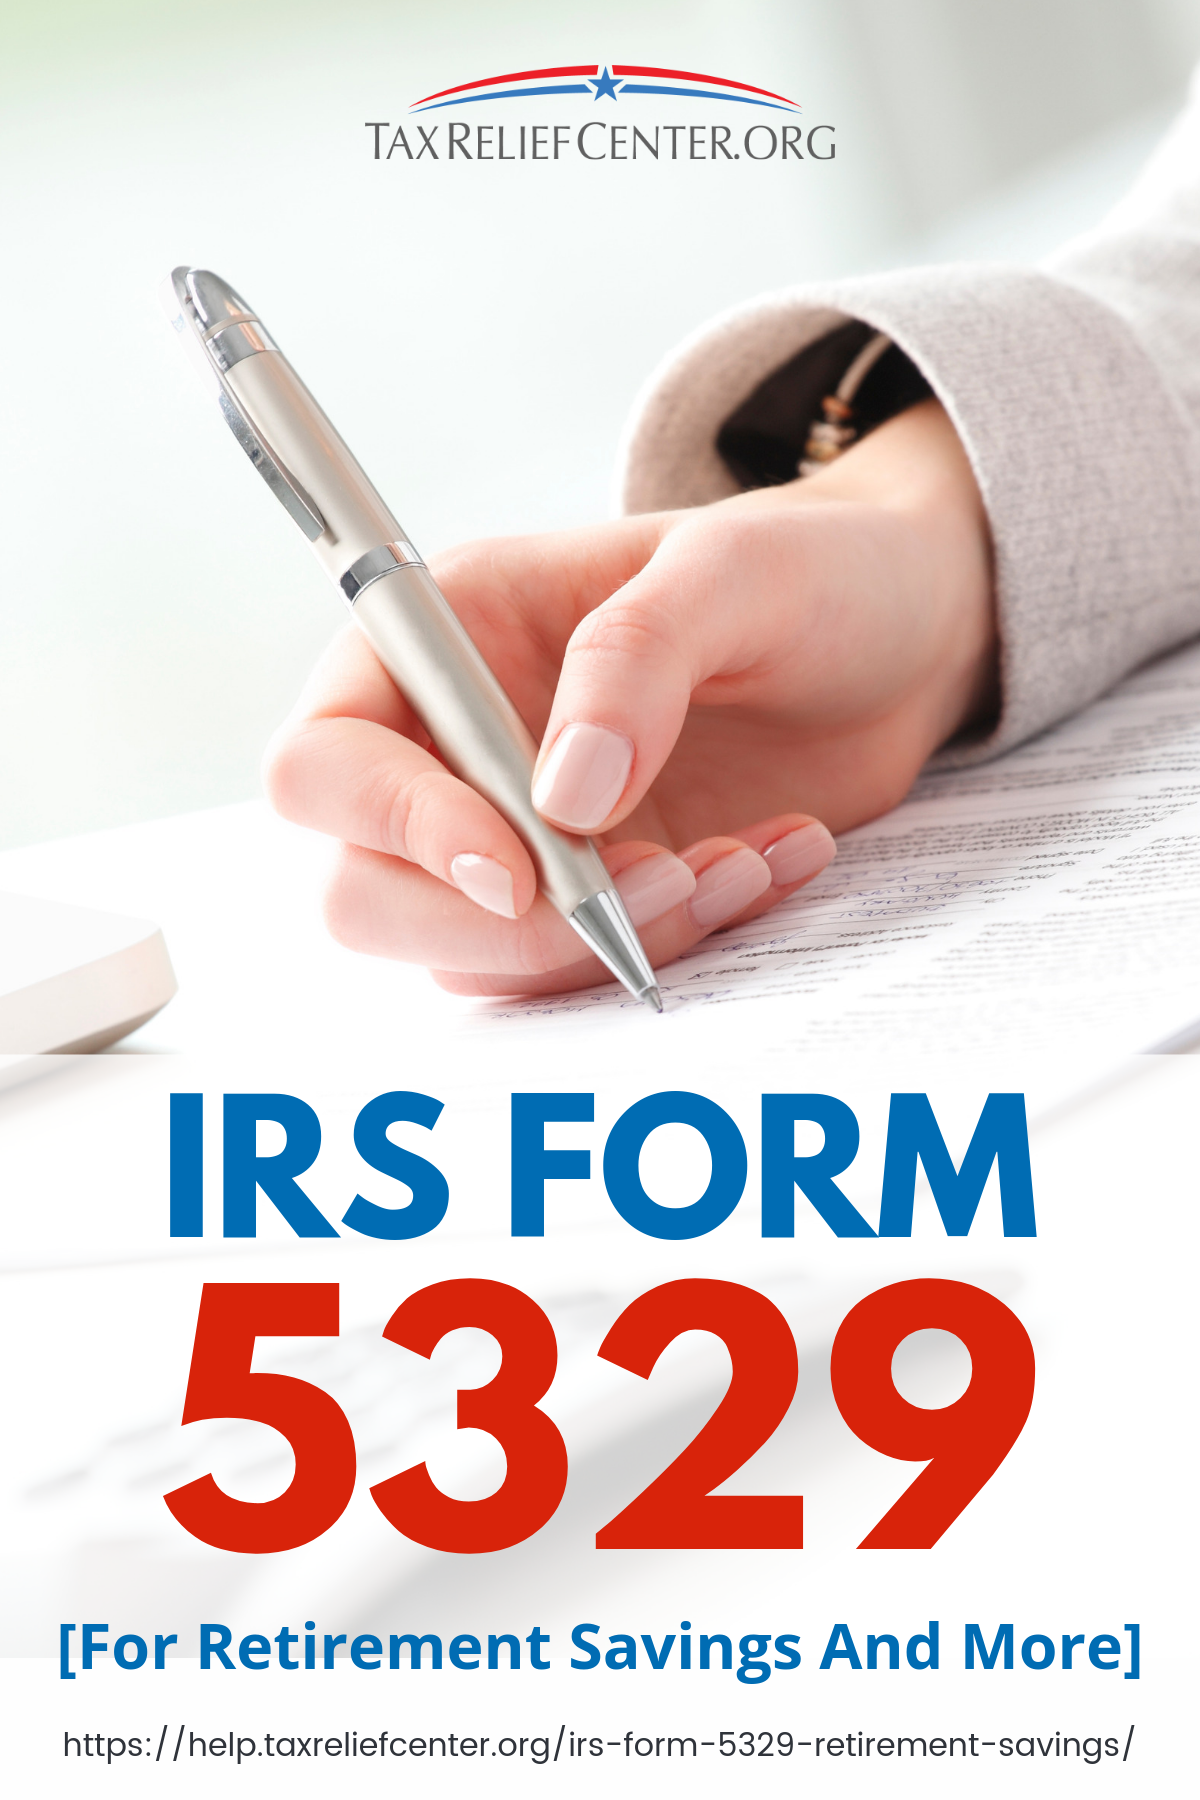 IRS Form 5329 [For Retirement Savings And More] | Internal Revenue Service https://help.taxreliefcenter.org/irs-form-5329-retirement-savings/